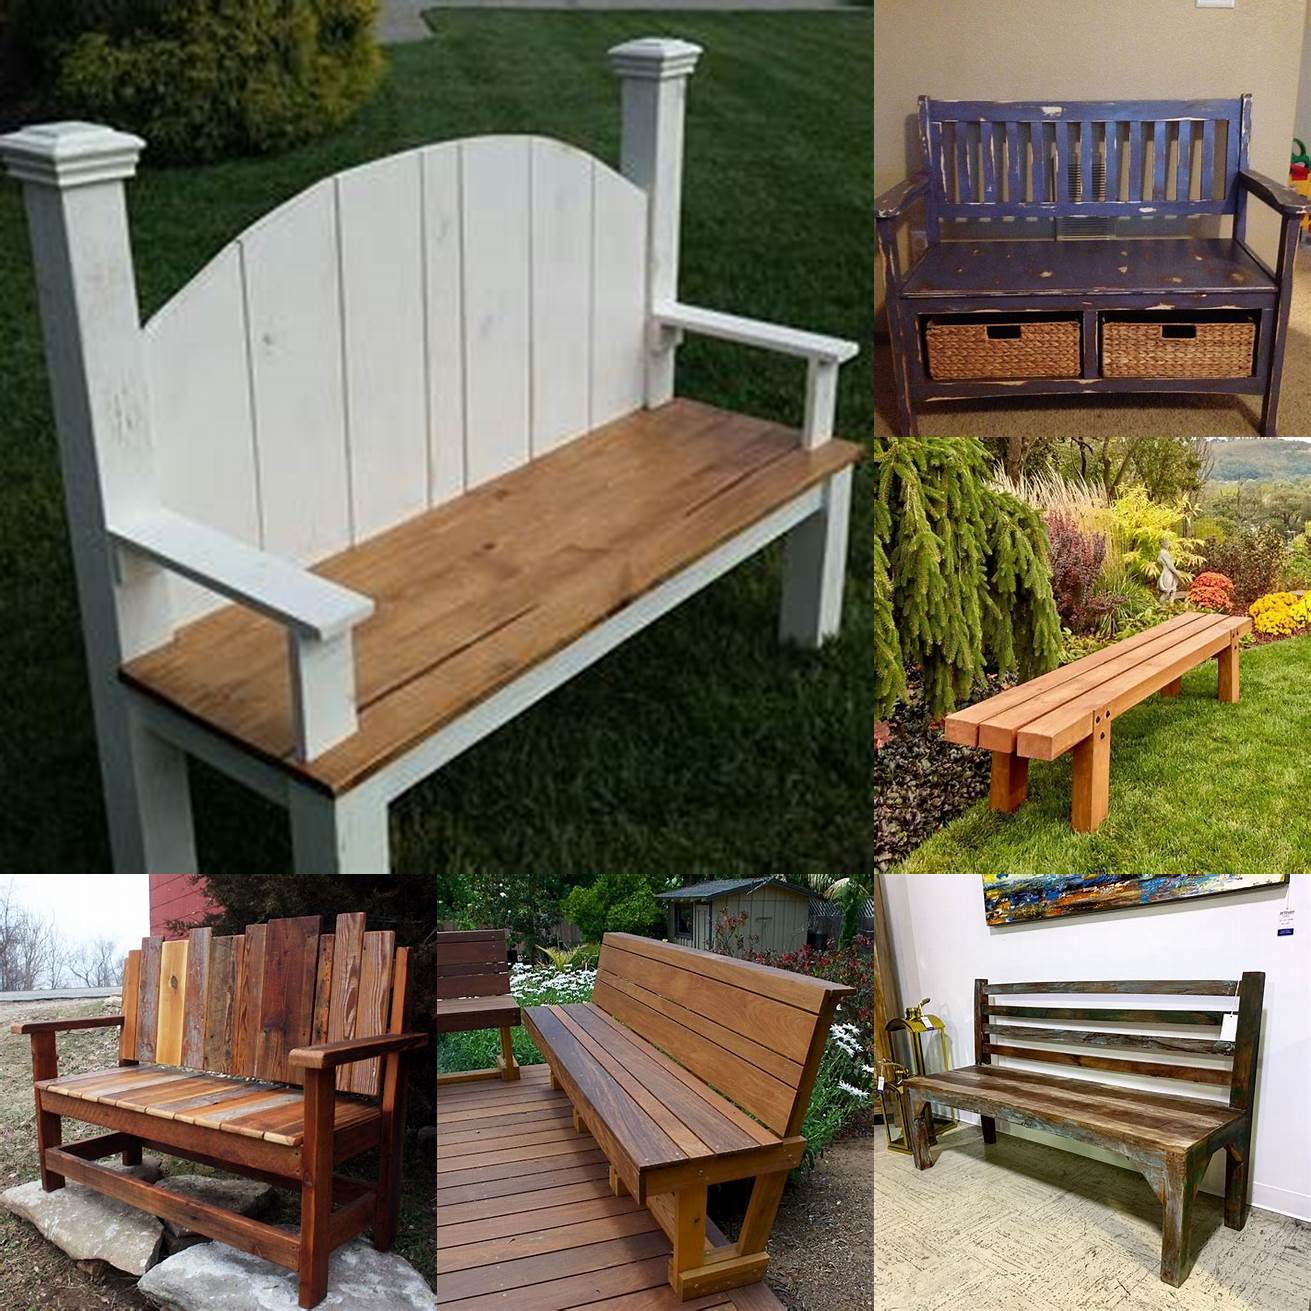 Add a distressed bench to your outdoor space